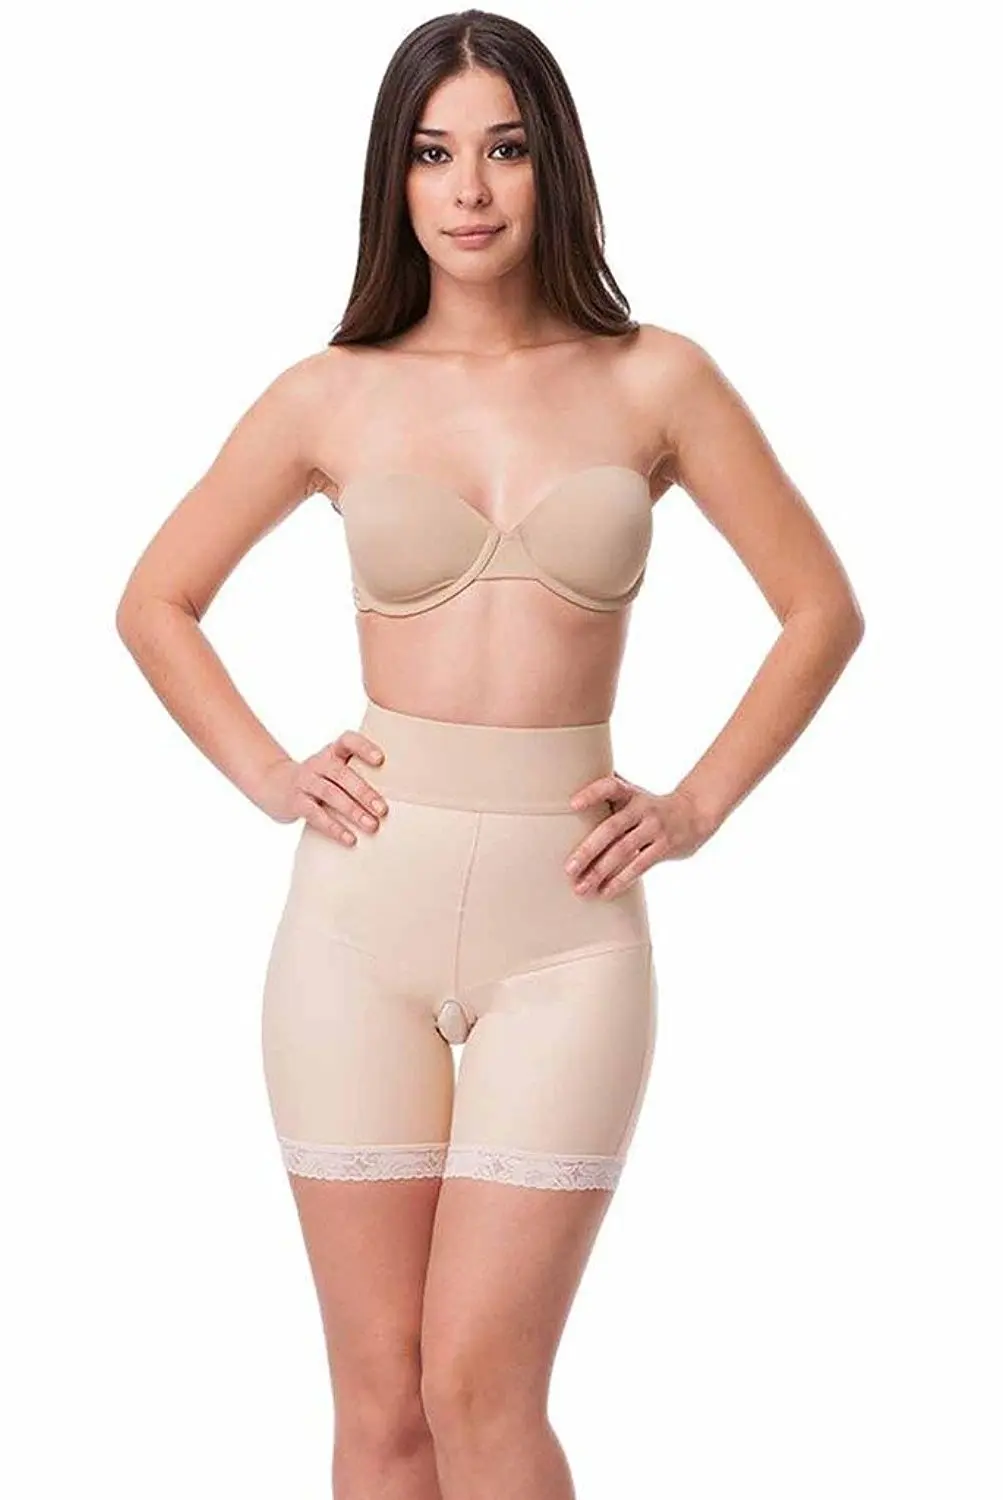 Isavela Womens 2nd Stage Open Buttock Enhancer Girdle No Zipper Mid Thigh L...